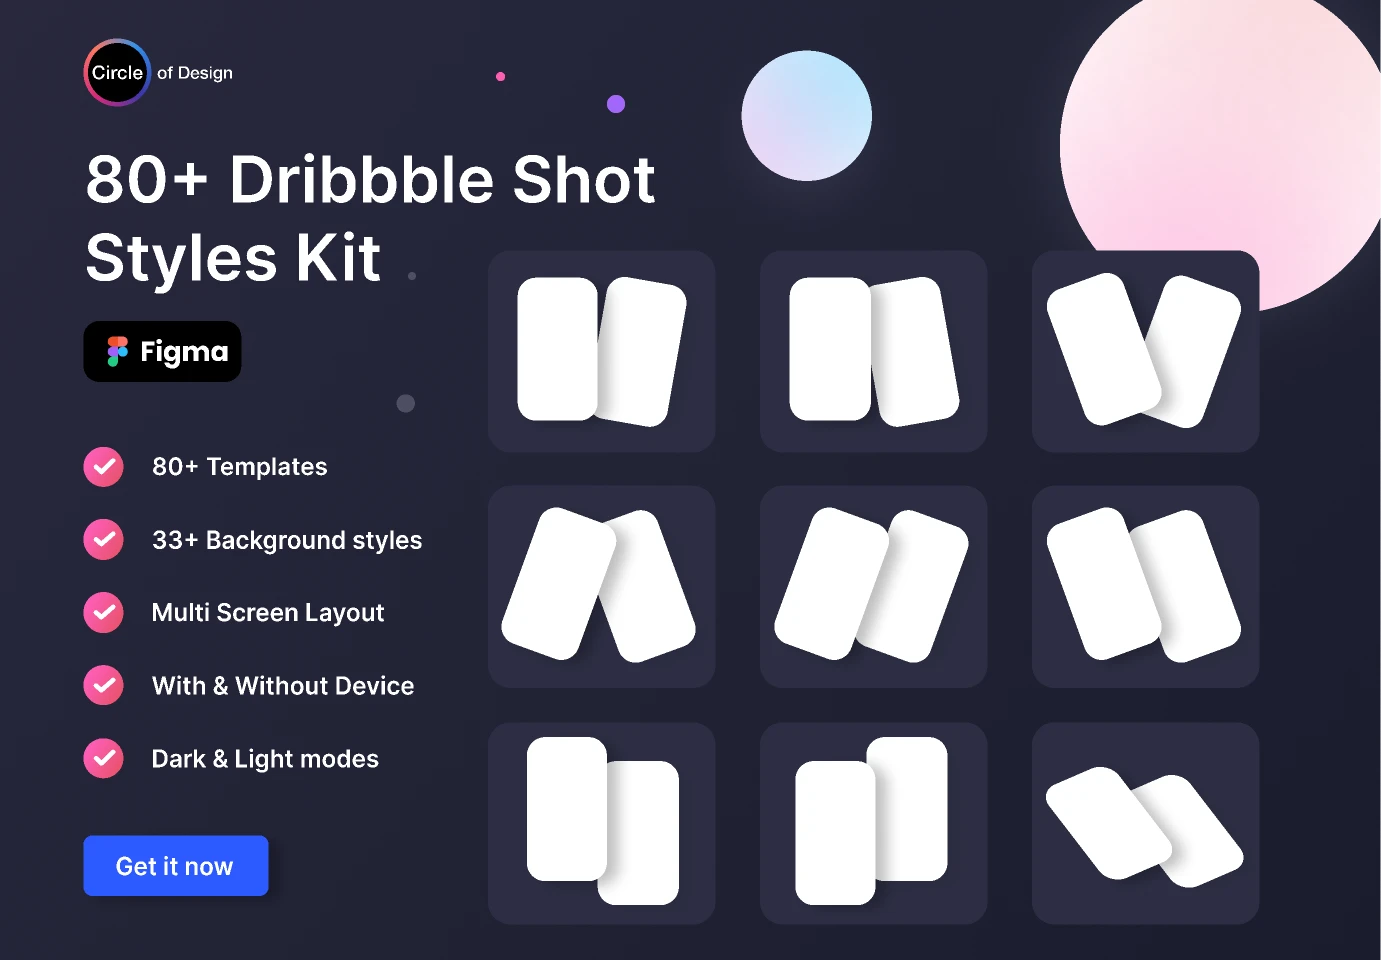 80+ Dribbble Shot Styles Kit for Figma and Adobe XD